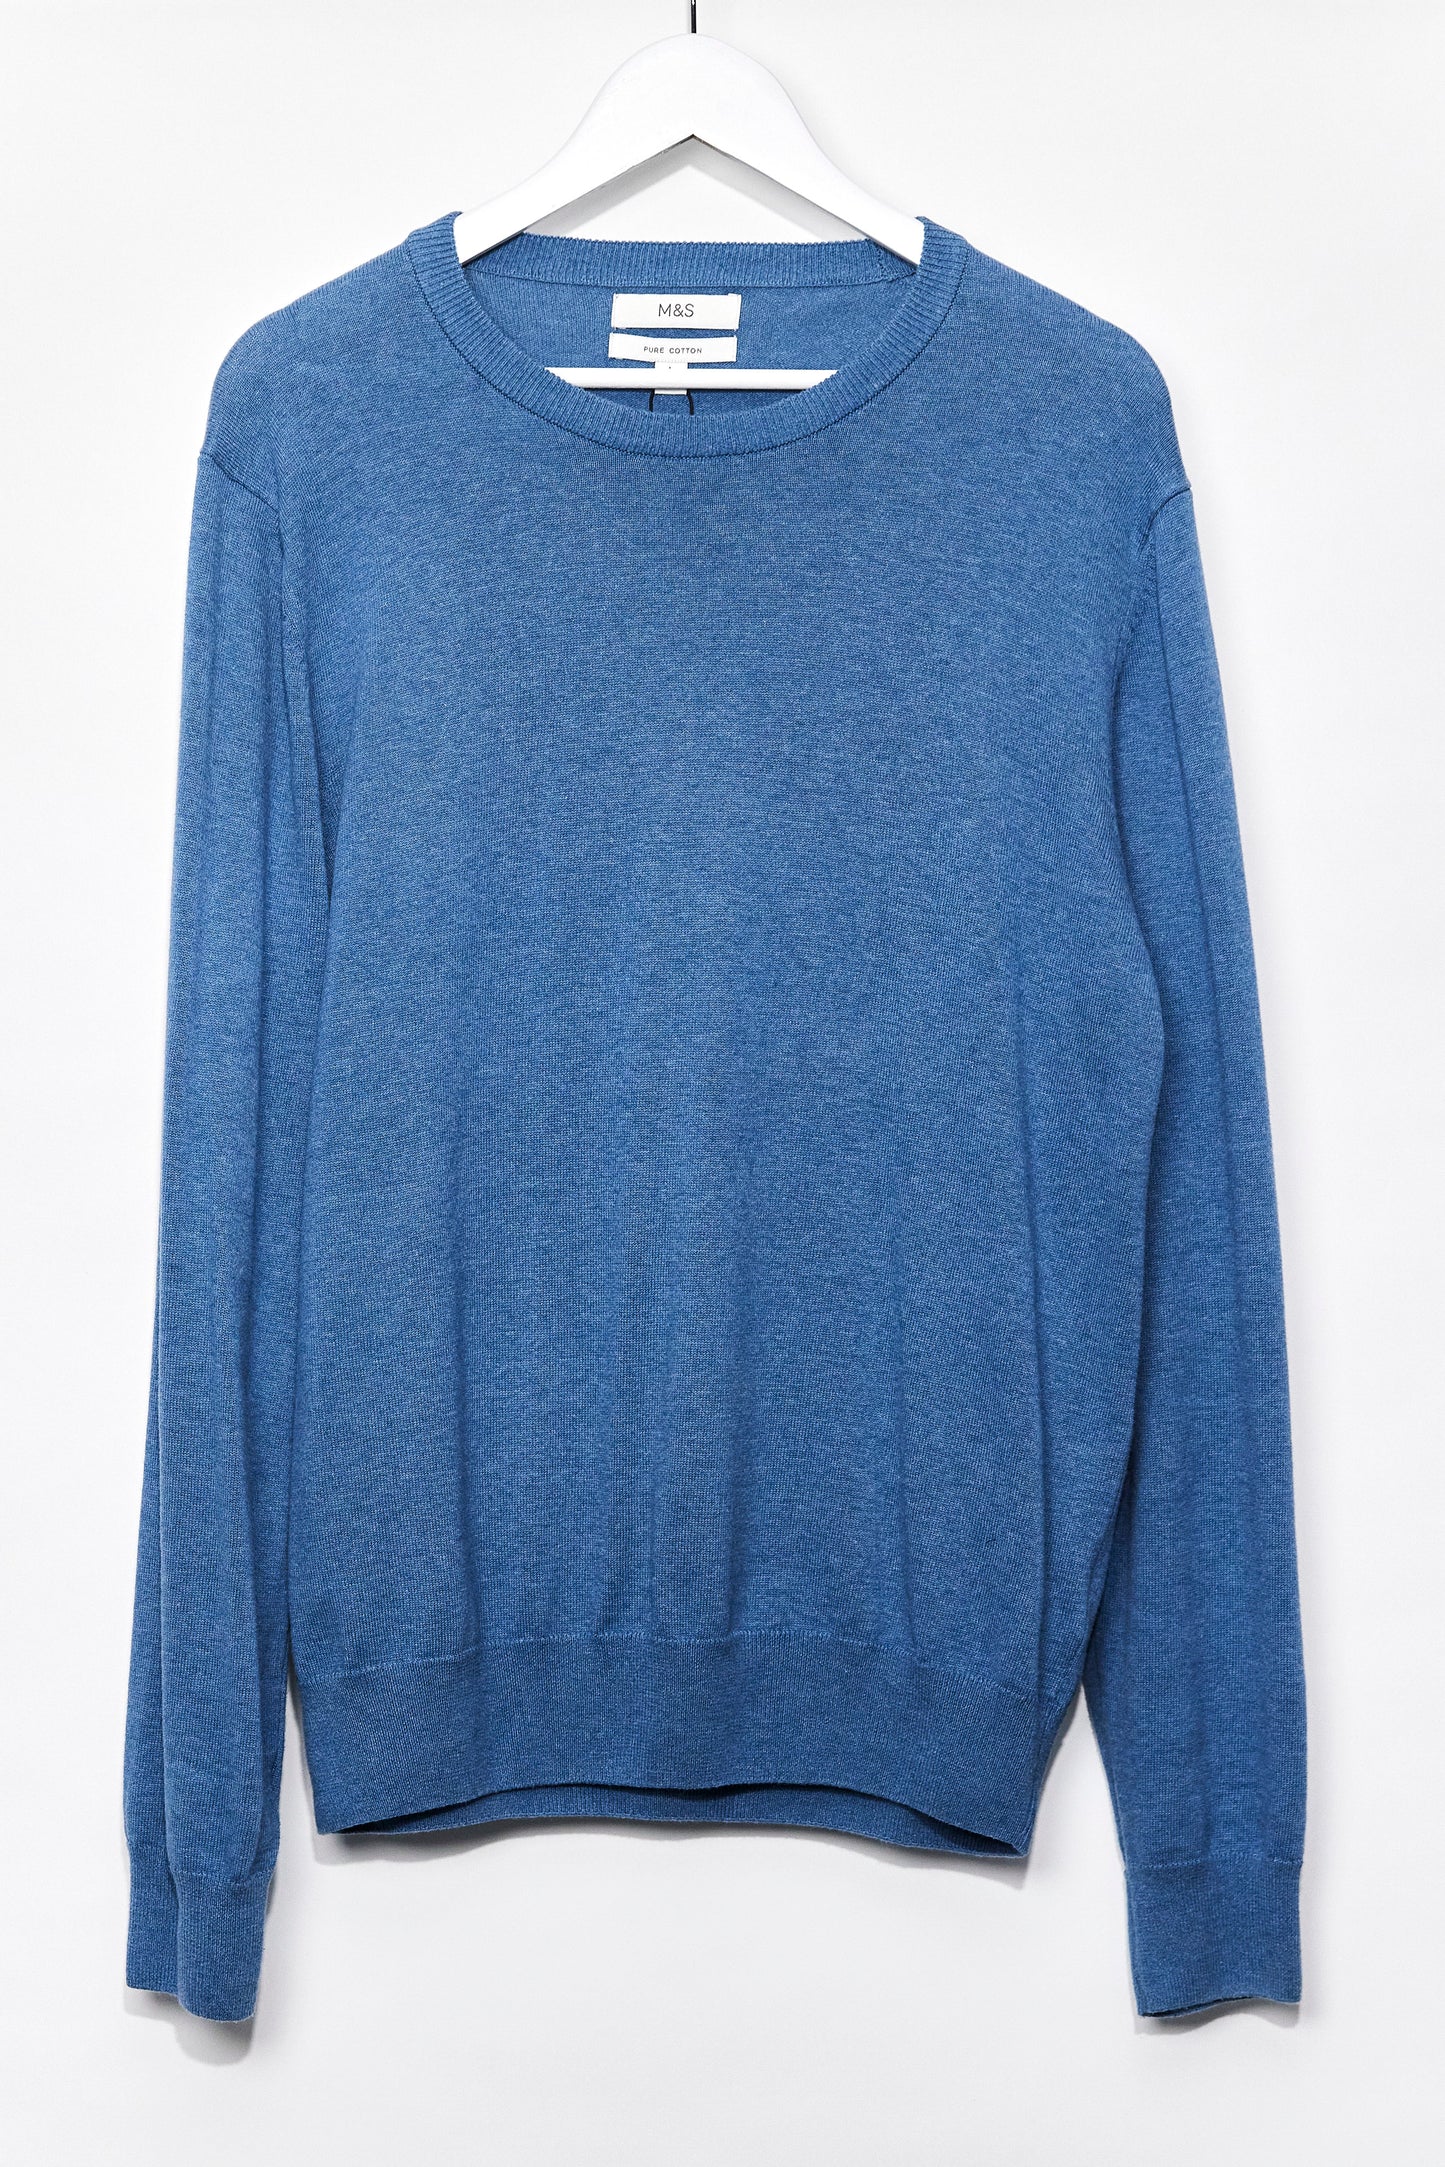 Mens M&S Blue Crew Neck knitted Jumper size Large